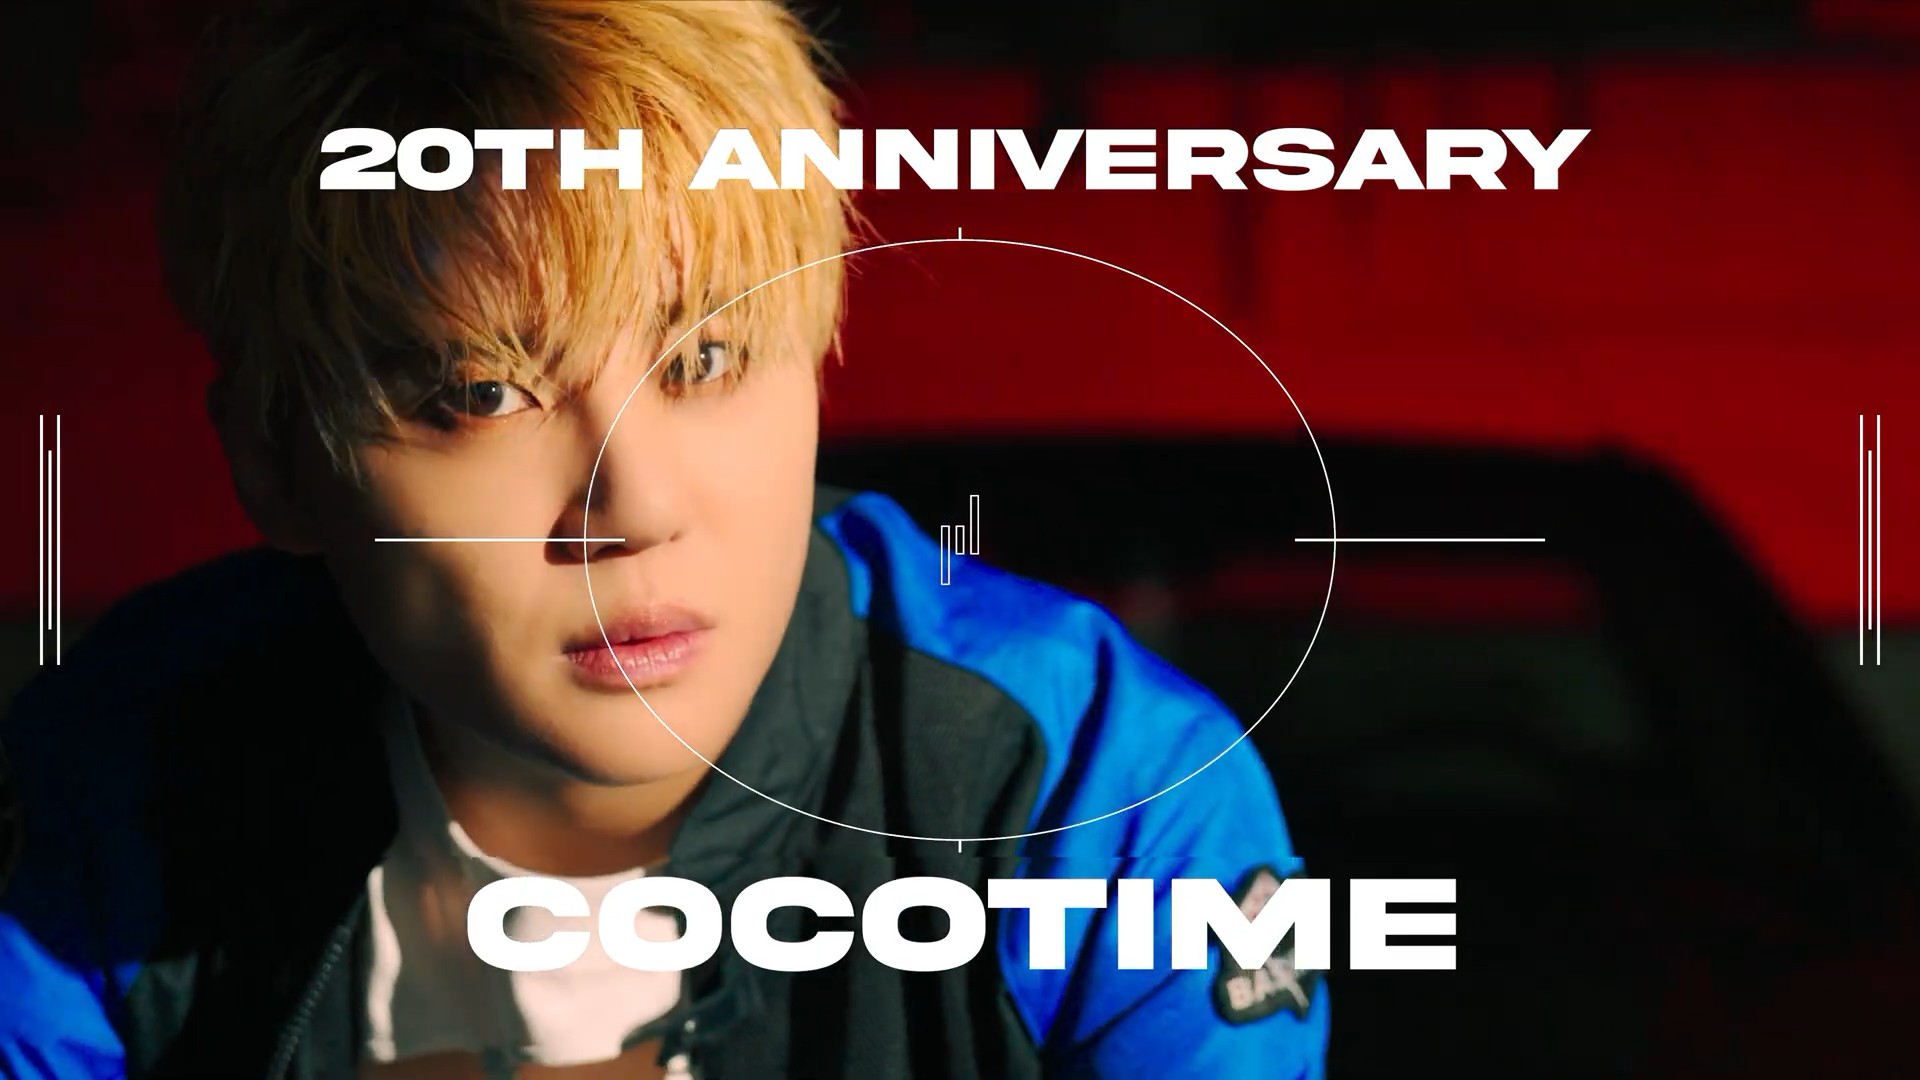 XIA l COCOTIME OPENING VCR27.jpg